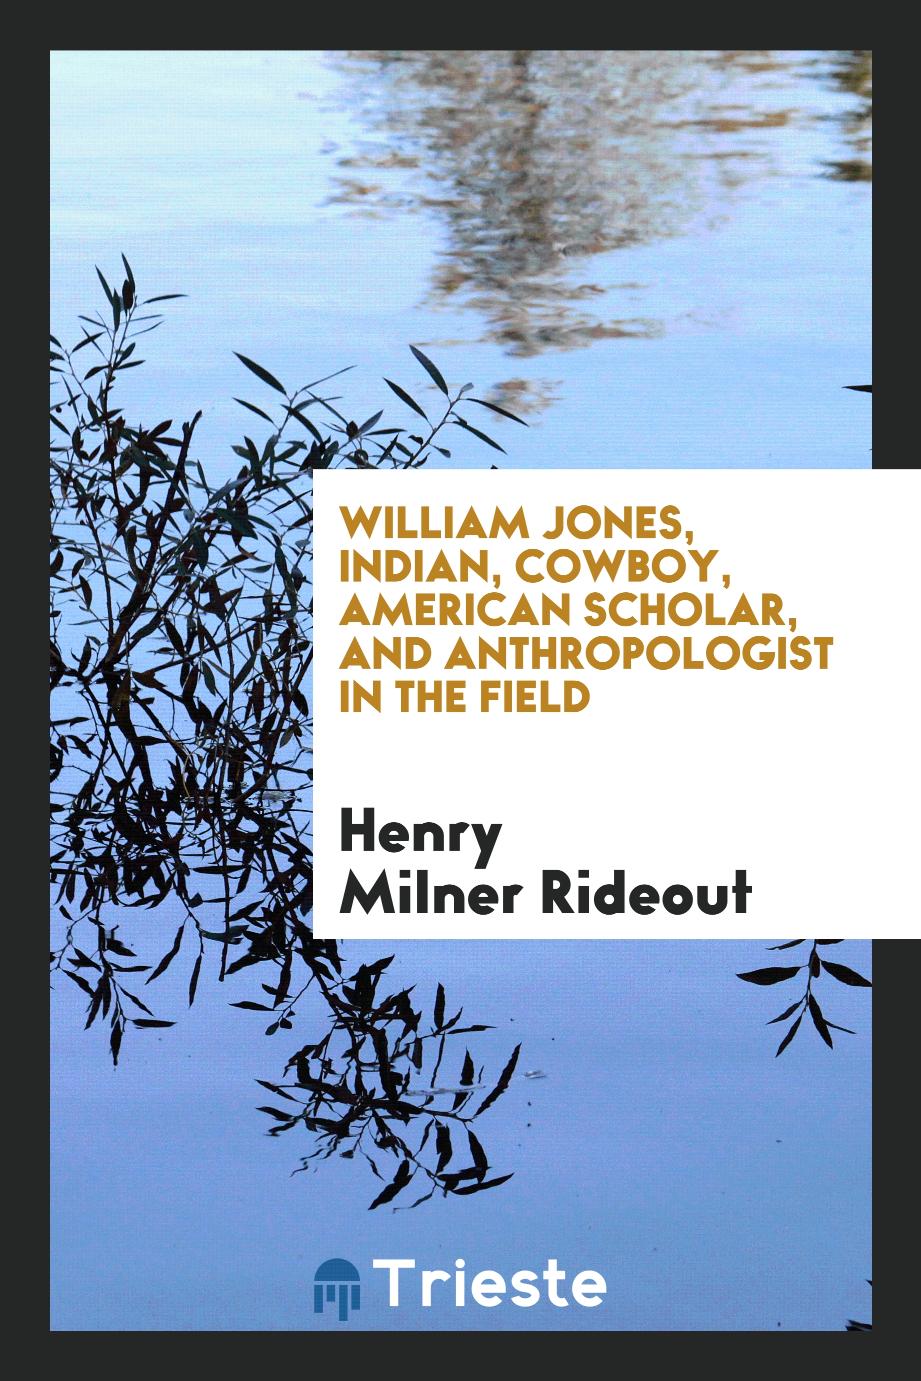 William Jones, Indian, cowboy, American scholar, and anthropologist in the field